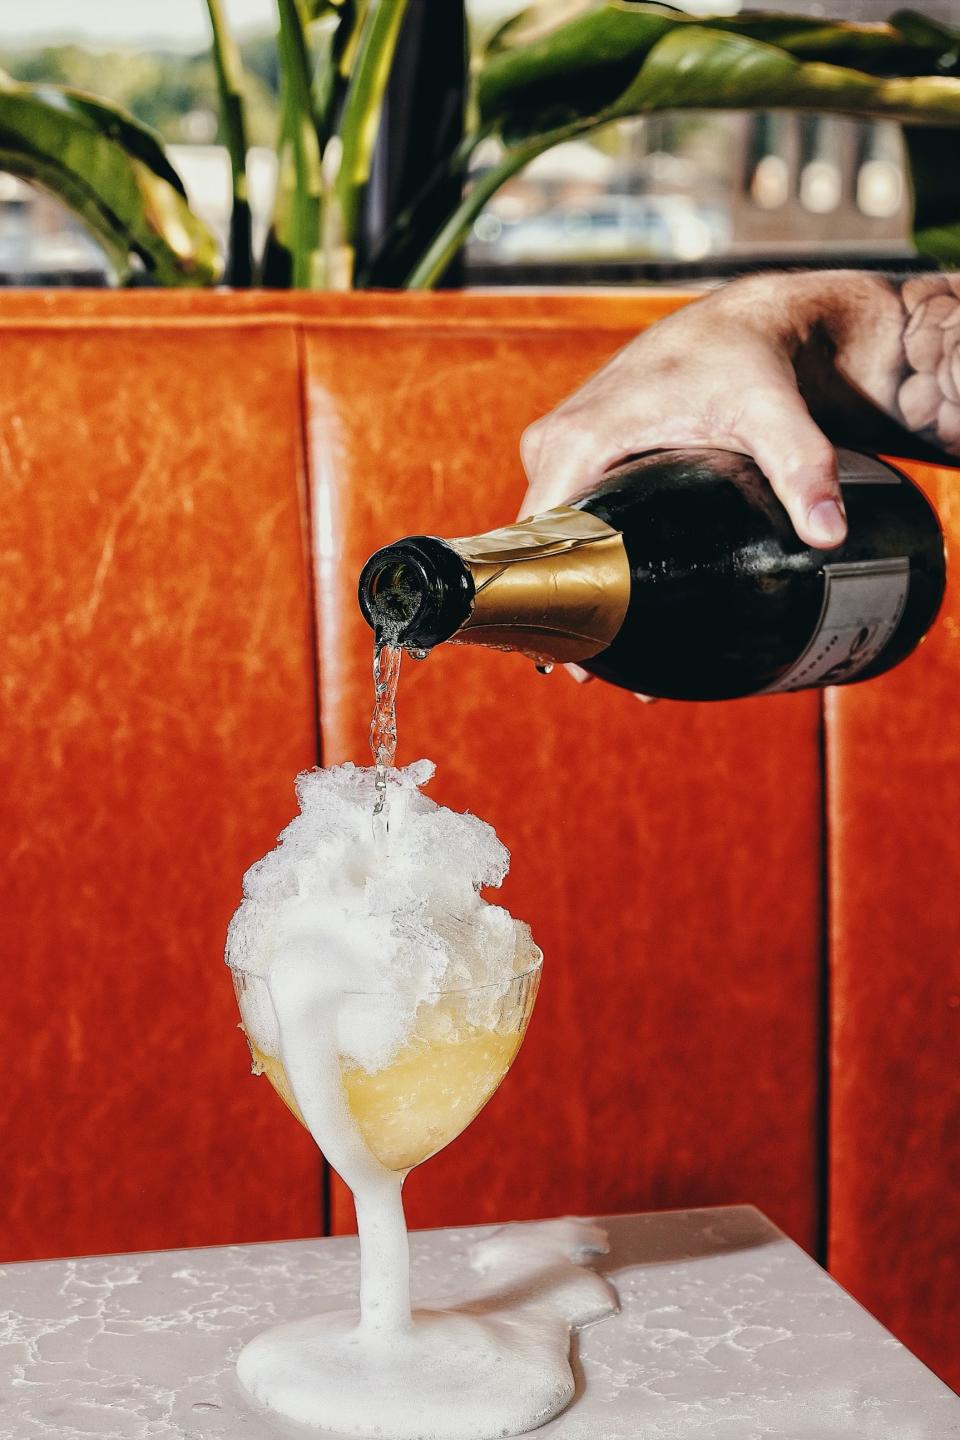 A take on the French 75 is one of Wild Child's zero-proof offerings.